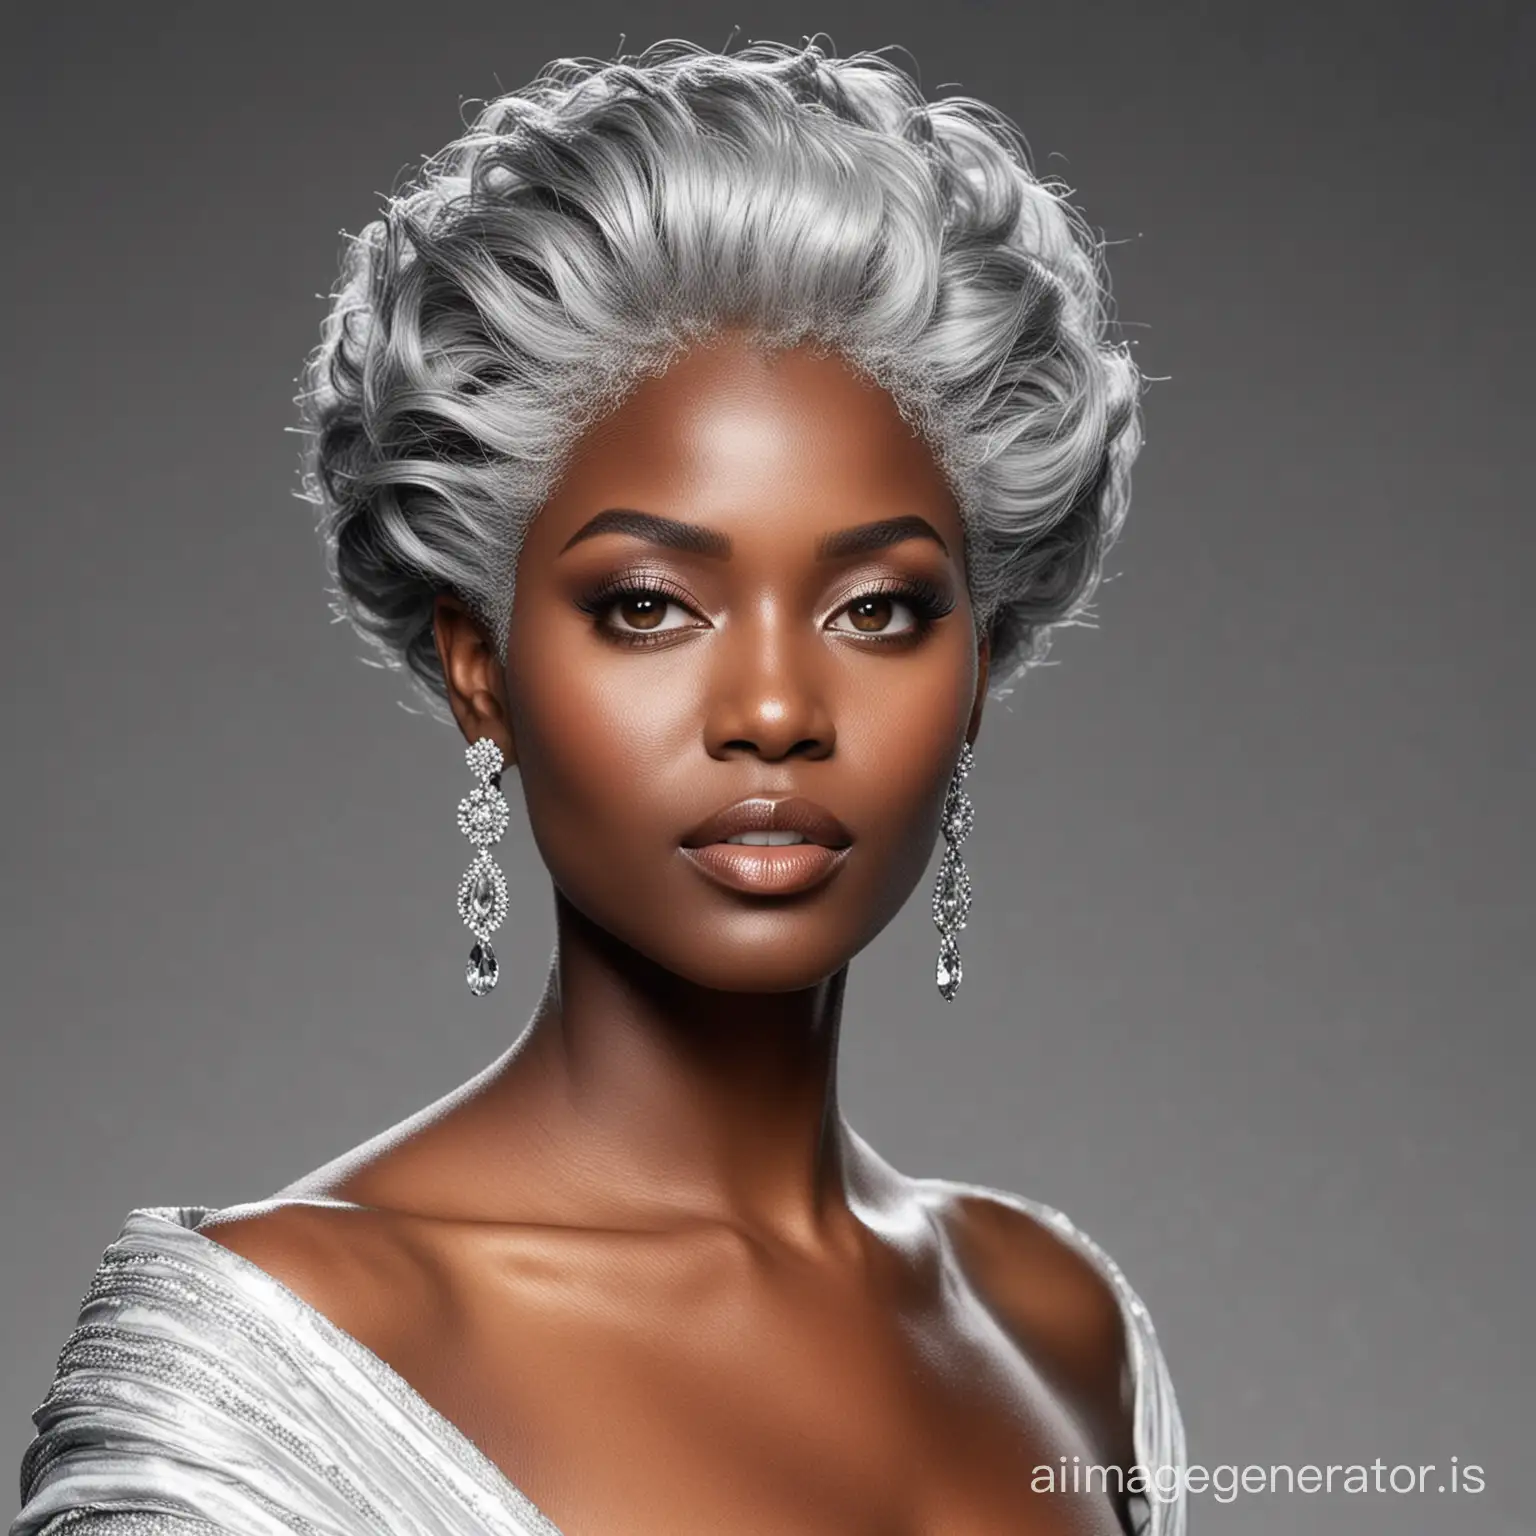 As she strides down the runway with confidence and grace, the beautiful black woman with grey hair commands attention like a regal queen. Her striking presence captivates onlookers, her every step exuding an air of sophistication and allure.

Her hair, a stunning contrast of ebony and silver, flows in luxurious waves around her shoulders. Each strand shimmers with a silvery sheen, catching the light and casting an ethereal glow. Despite its unconventional hue, her grey hair frames her face with elegance and distinction, adding a touch of mystery to her captivating beauty.

Her facial features are exquisite and finely sculpted, with high cheekbones and full lips that exude sensuality and strength. Her smooth, cocoa-toned complexion radiates a natural luminosity, enhancing her stunning features and drawing attention to her striking gaze.

Speaking of which, her eyes are pools of depth and wisdom, a mesmerizing shade of grey that holds a thousand stories within their depths. They sparkle with intelligence and confidence, captivating all who meet her gaze.

Draped in haute couture, she embodies the epitome of style and sophistication. Each garment accentuates her curves and complements her statuesque figure, enhancing her natural beauty and commanding attention with every strut.

In essence, the beautiful black woman with grey hair is a vision of timeless elegance and strength. Her presence on the runway is nothing short of magnetic, leaving an indelible impression on all who have the privilege of witnessing her grace the catwalk.